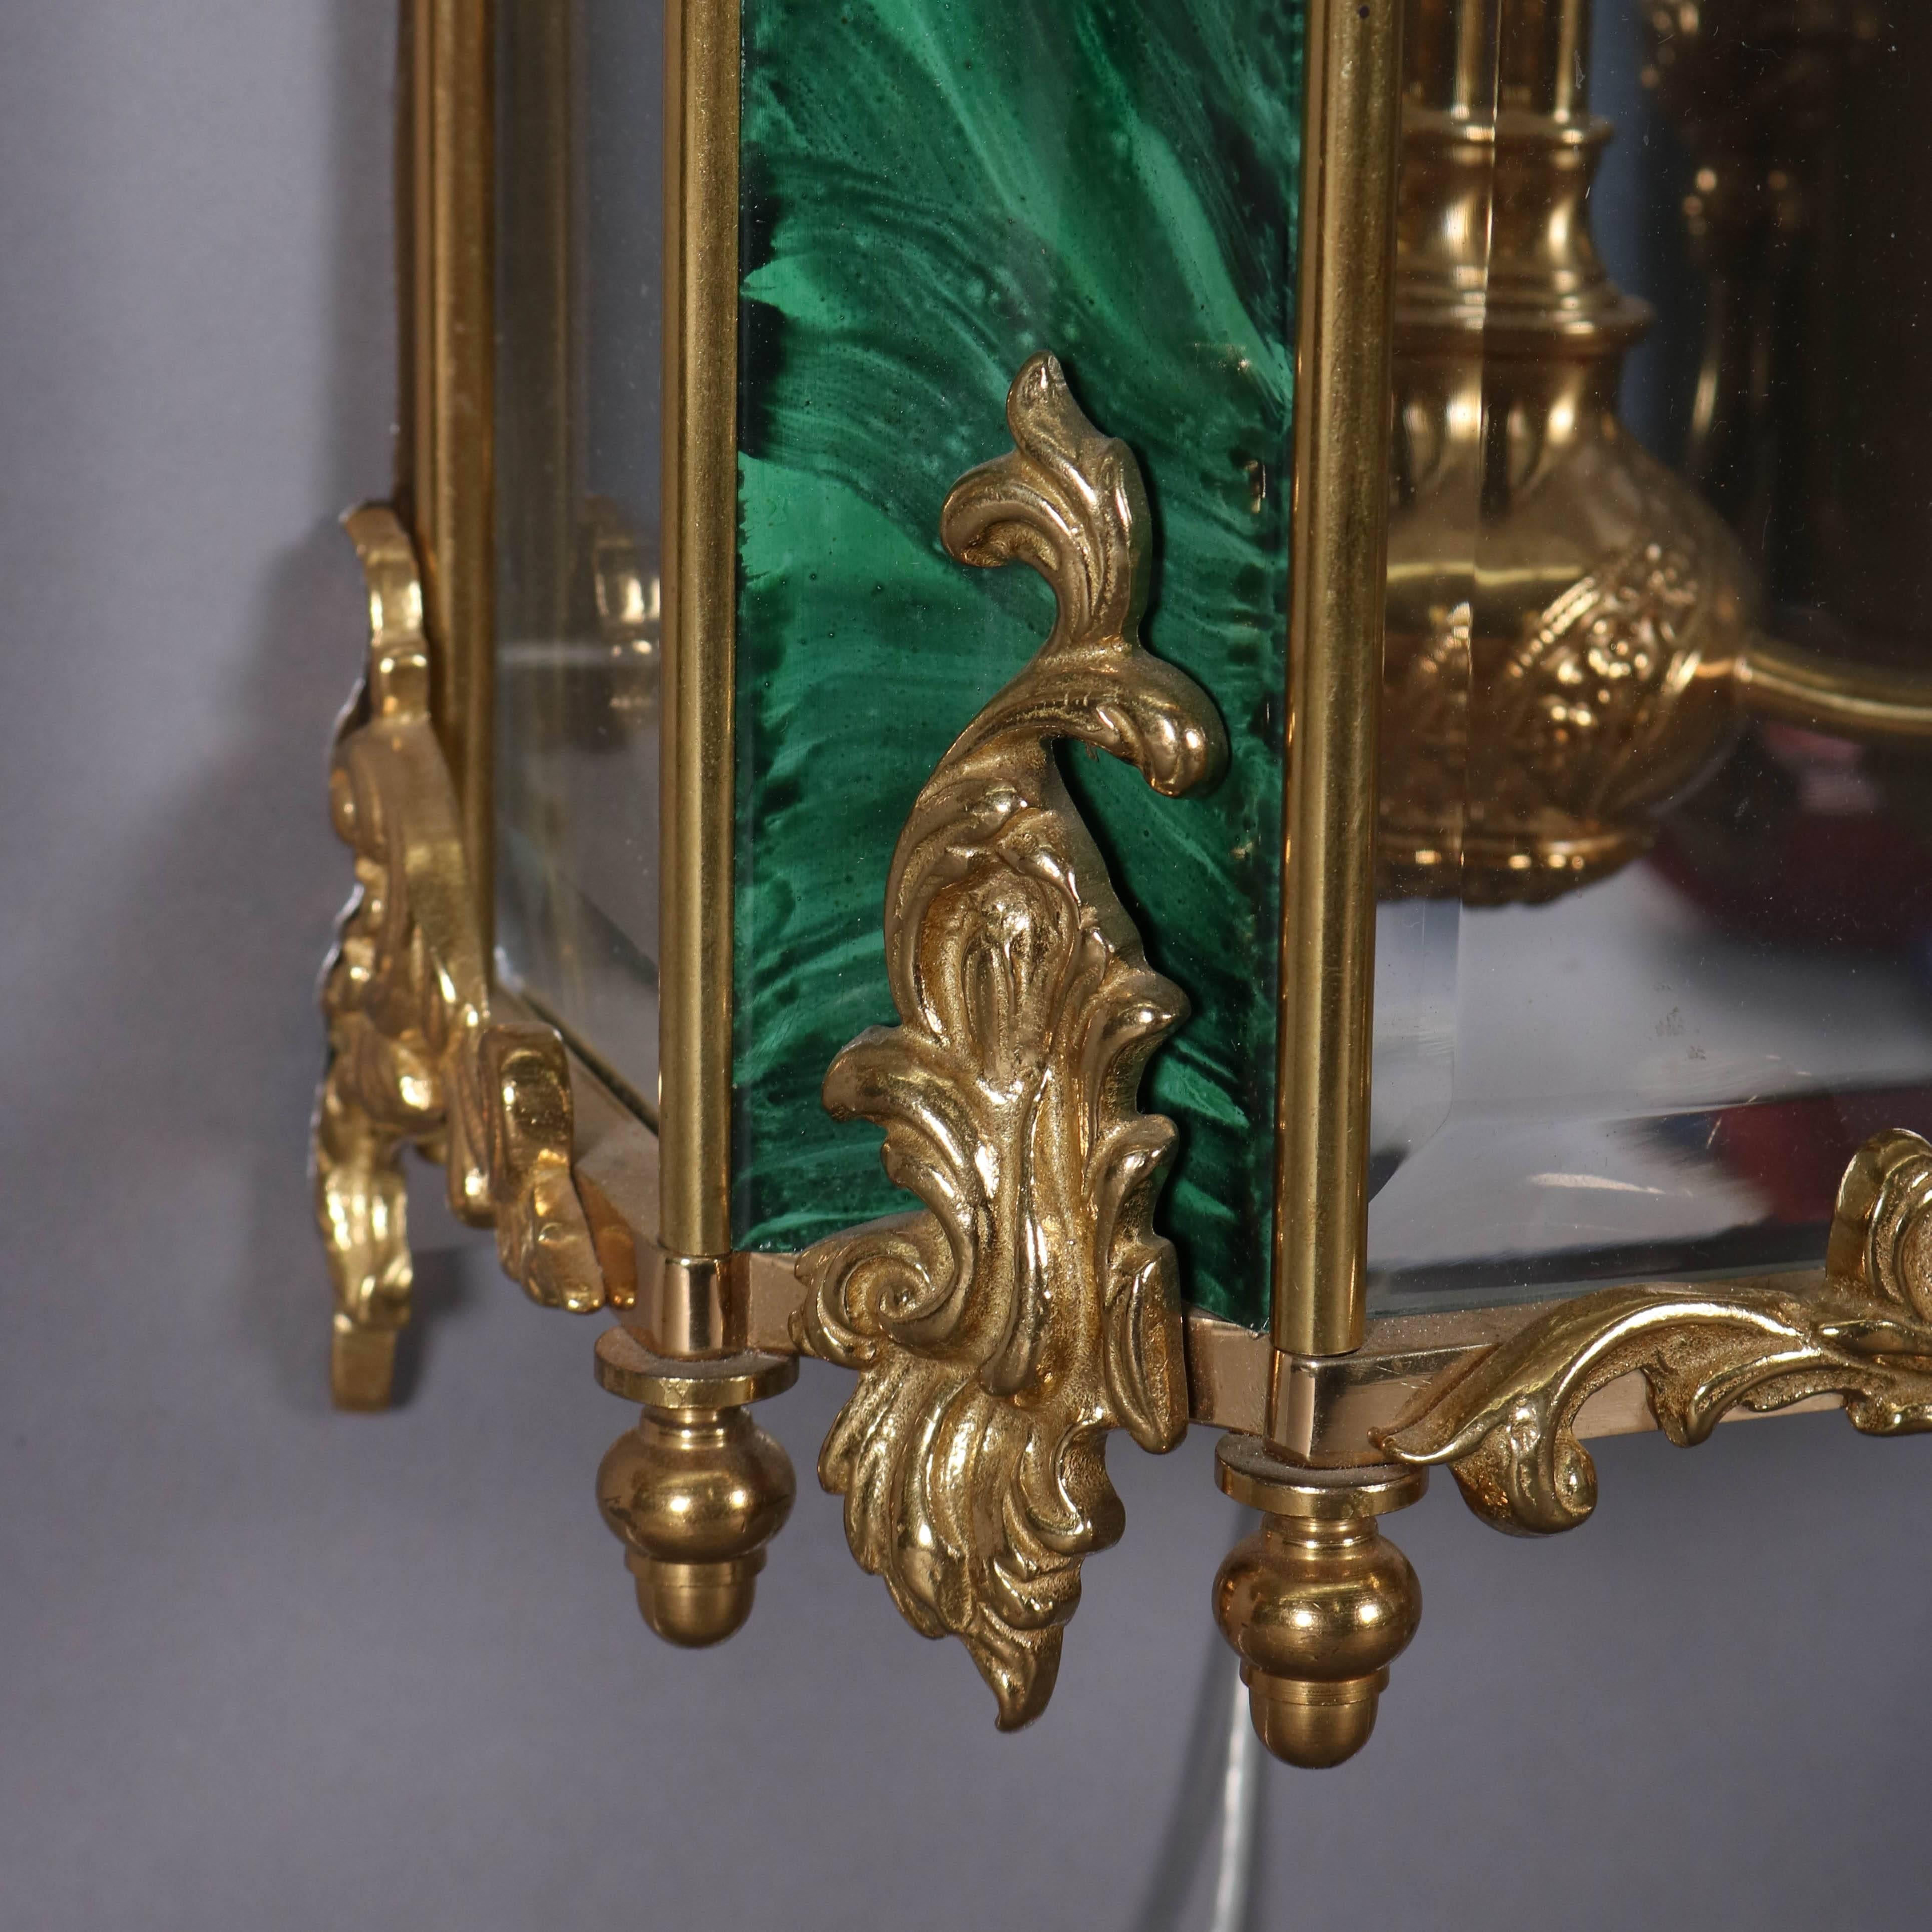 20th Century French Style Gilt Bronze and Faux Malachite Panelled Mirrored Wall Sconces, Pair